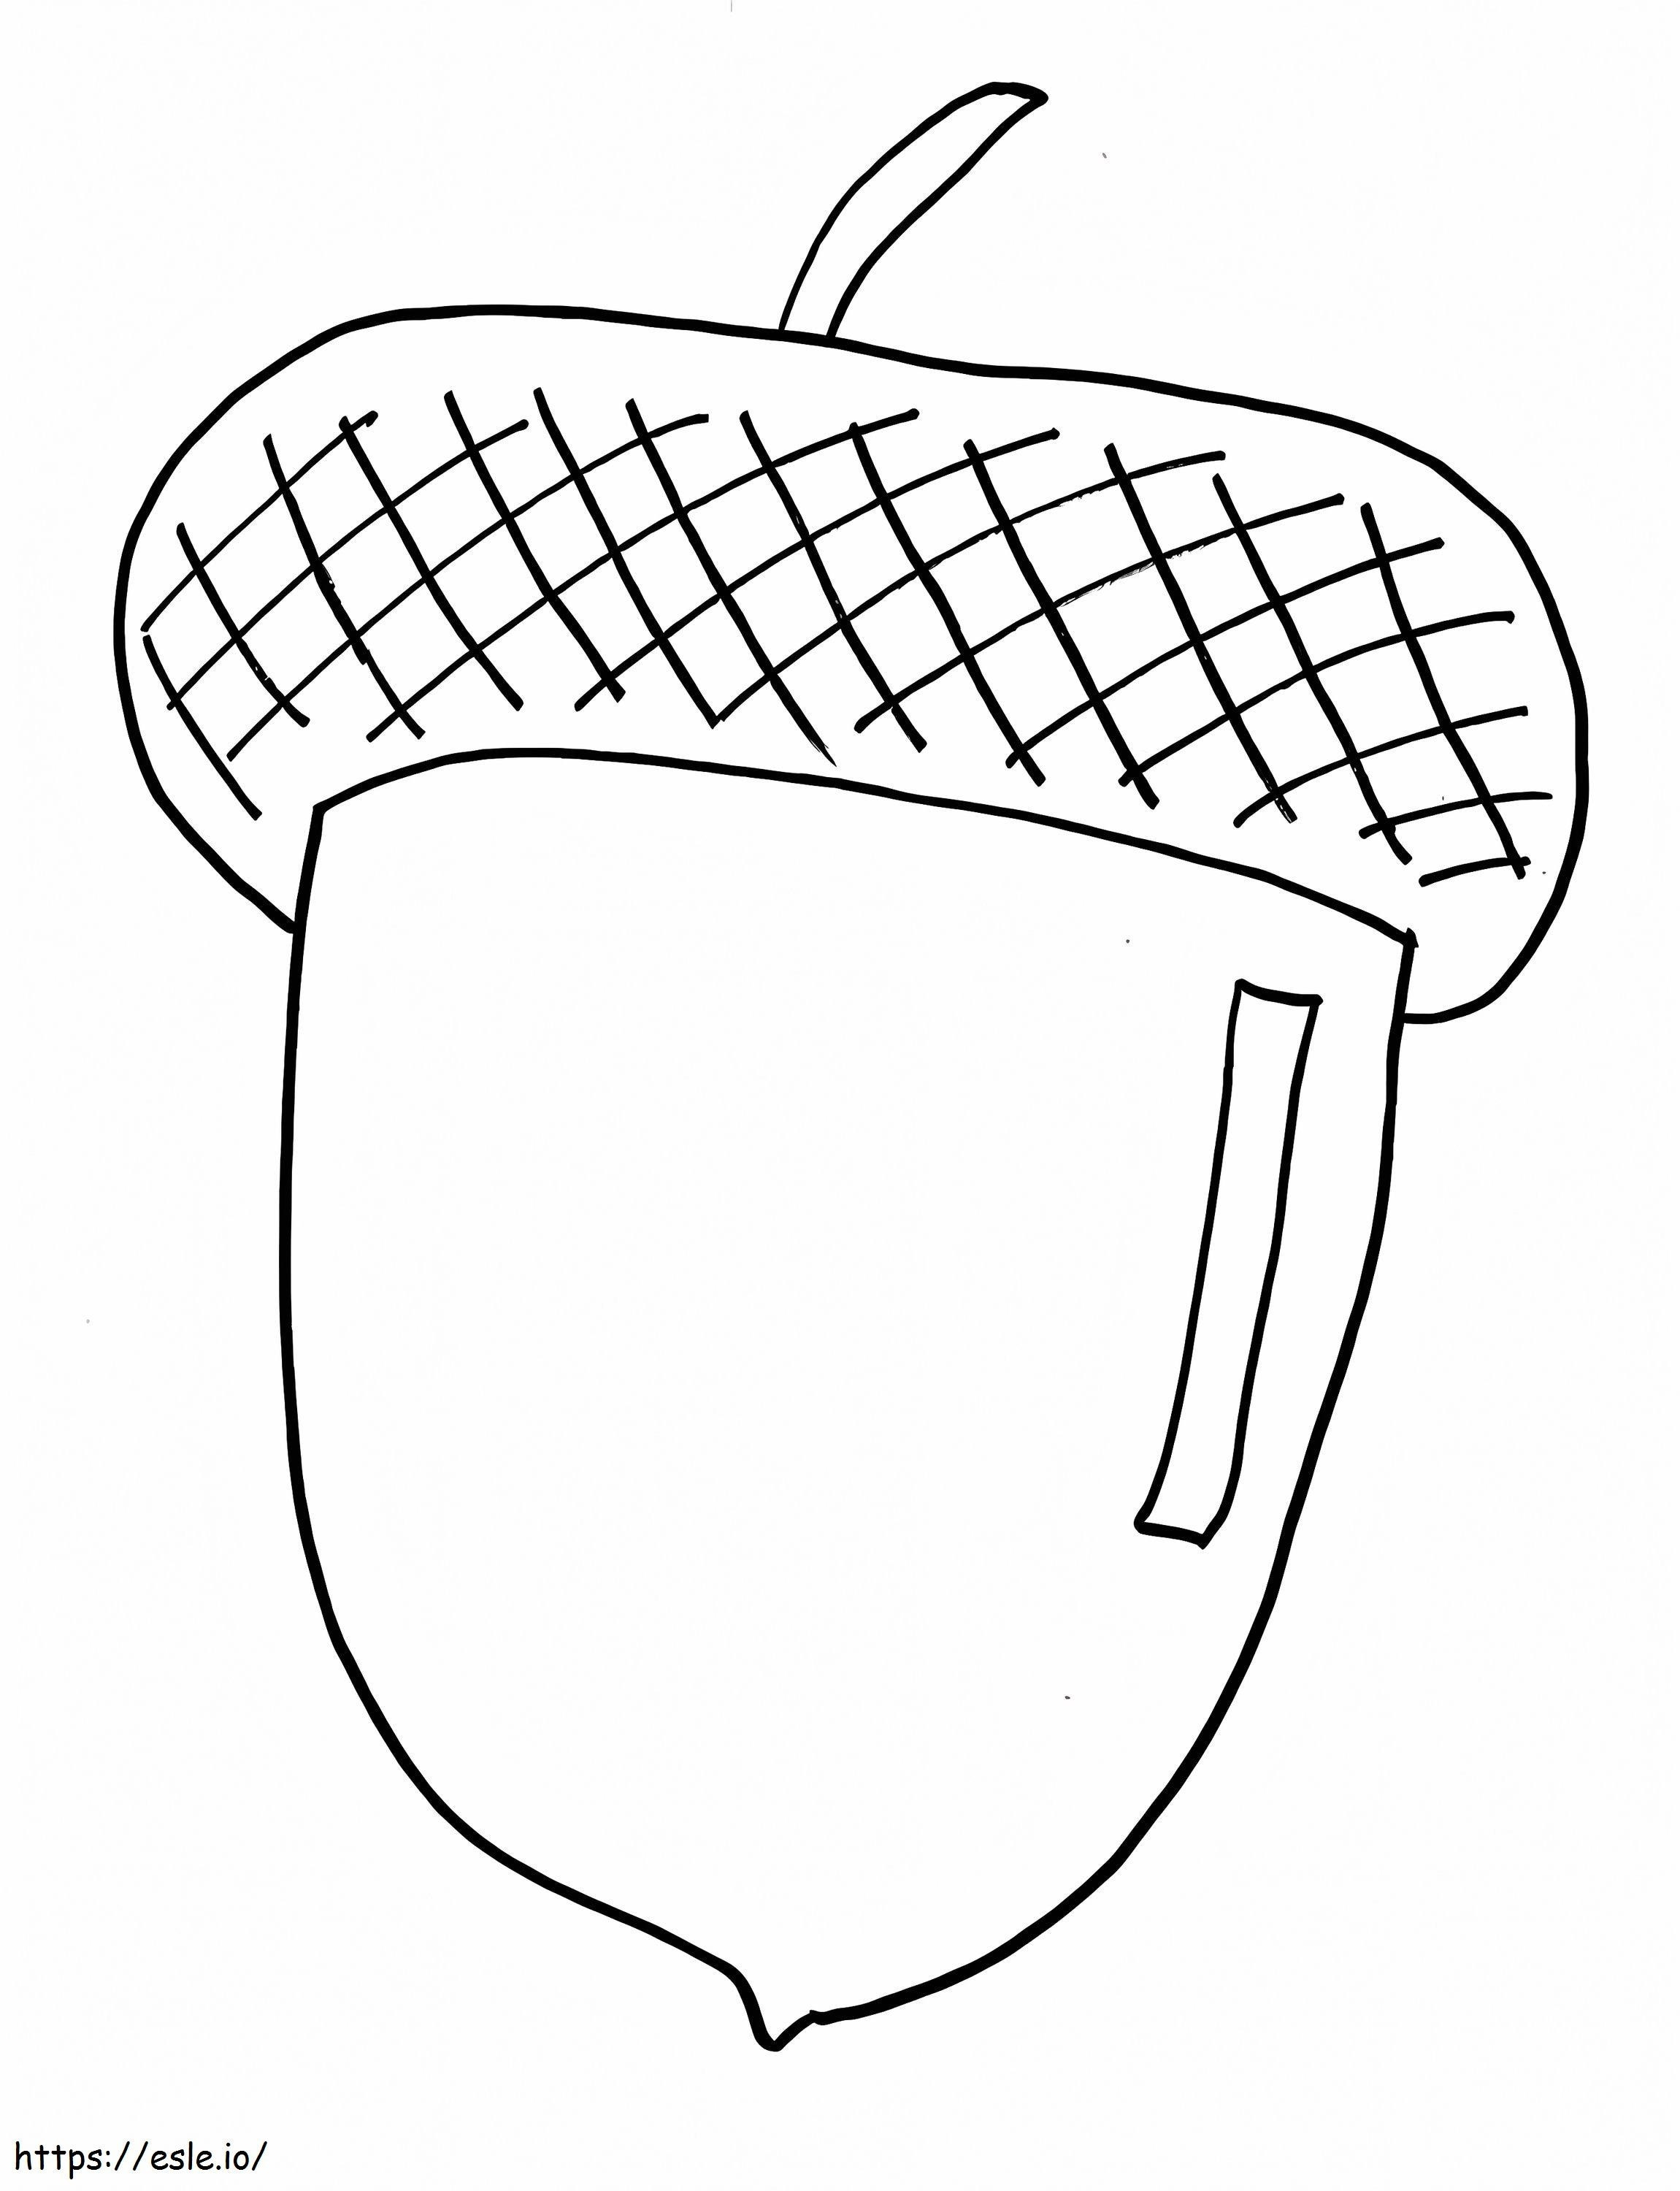 Acorn 4 coloring page